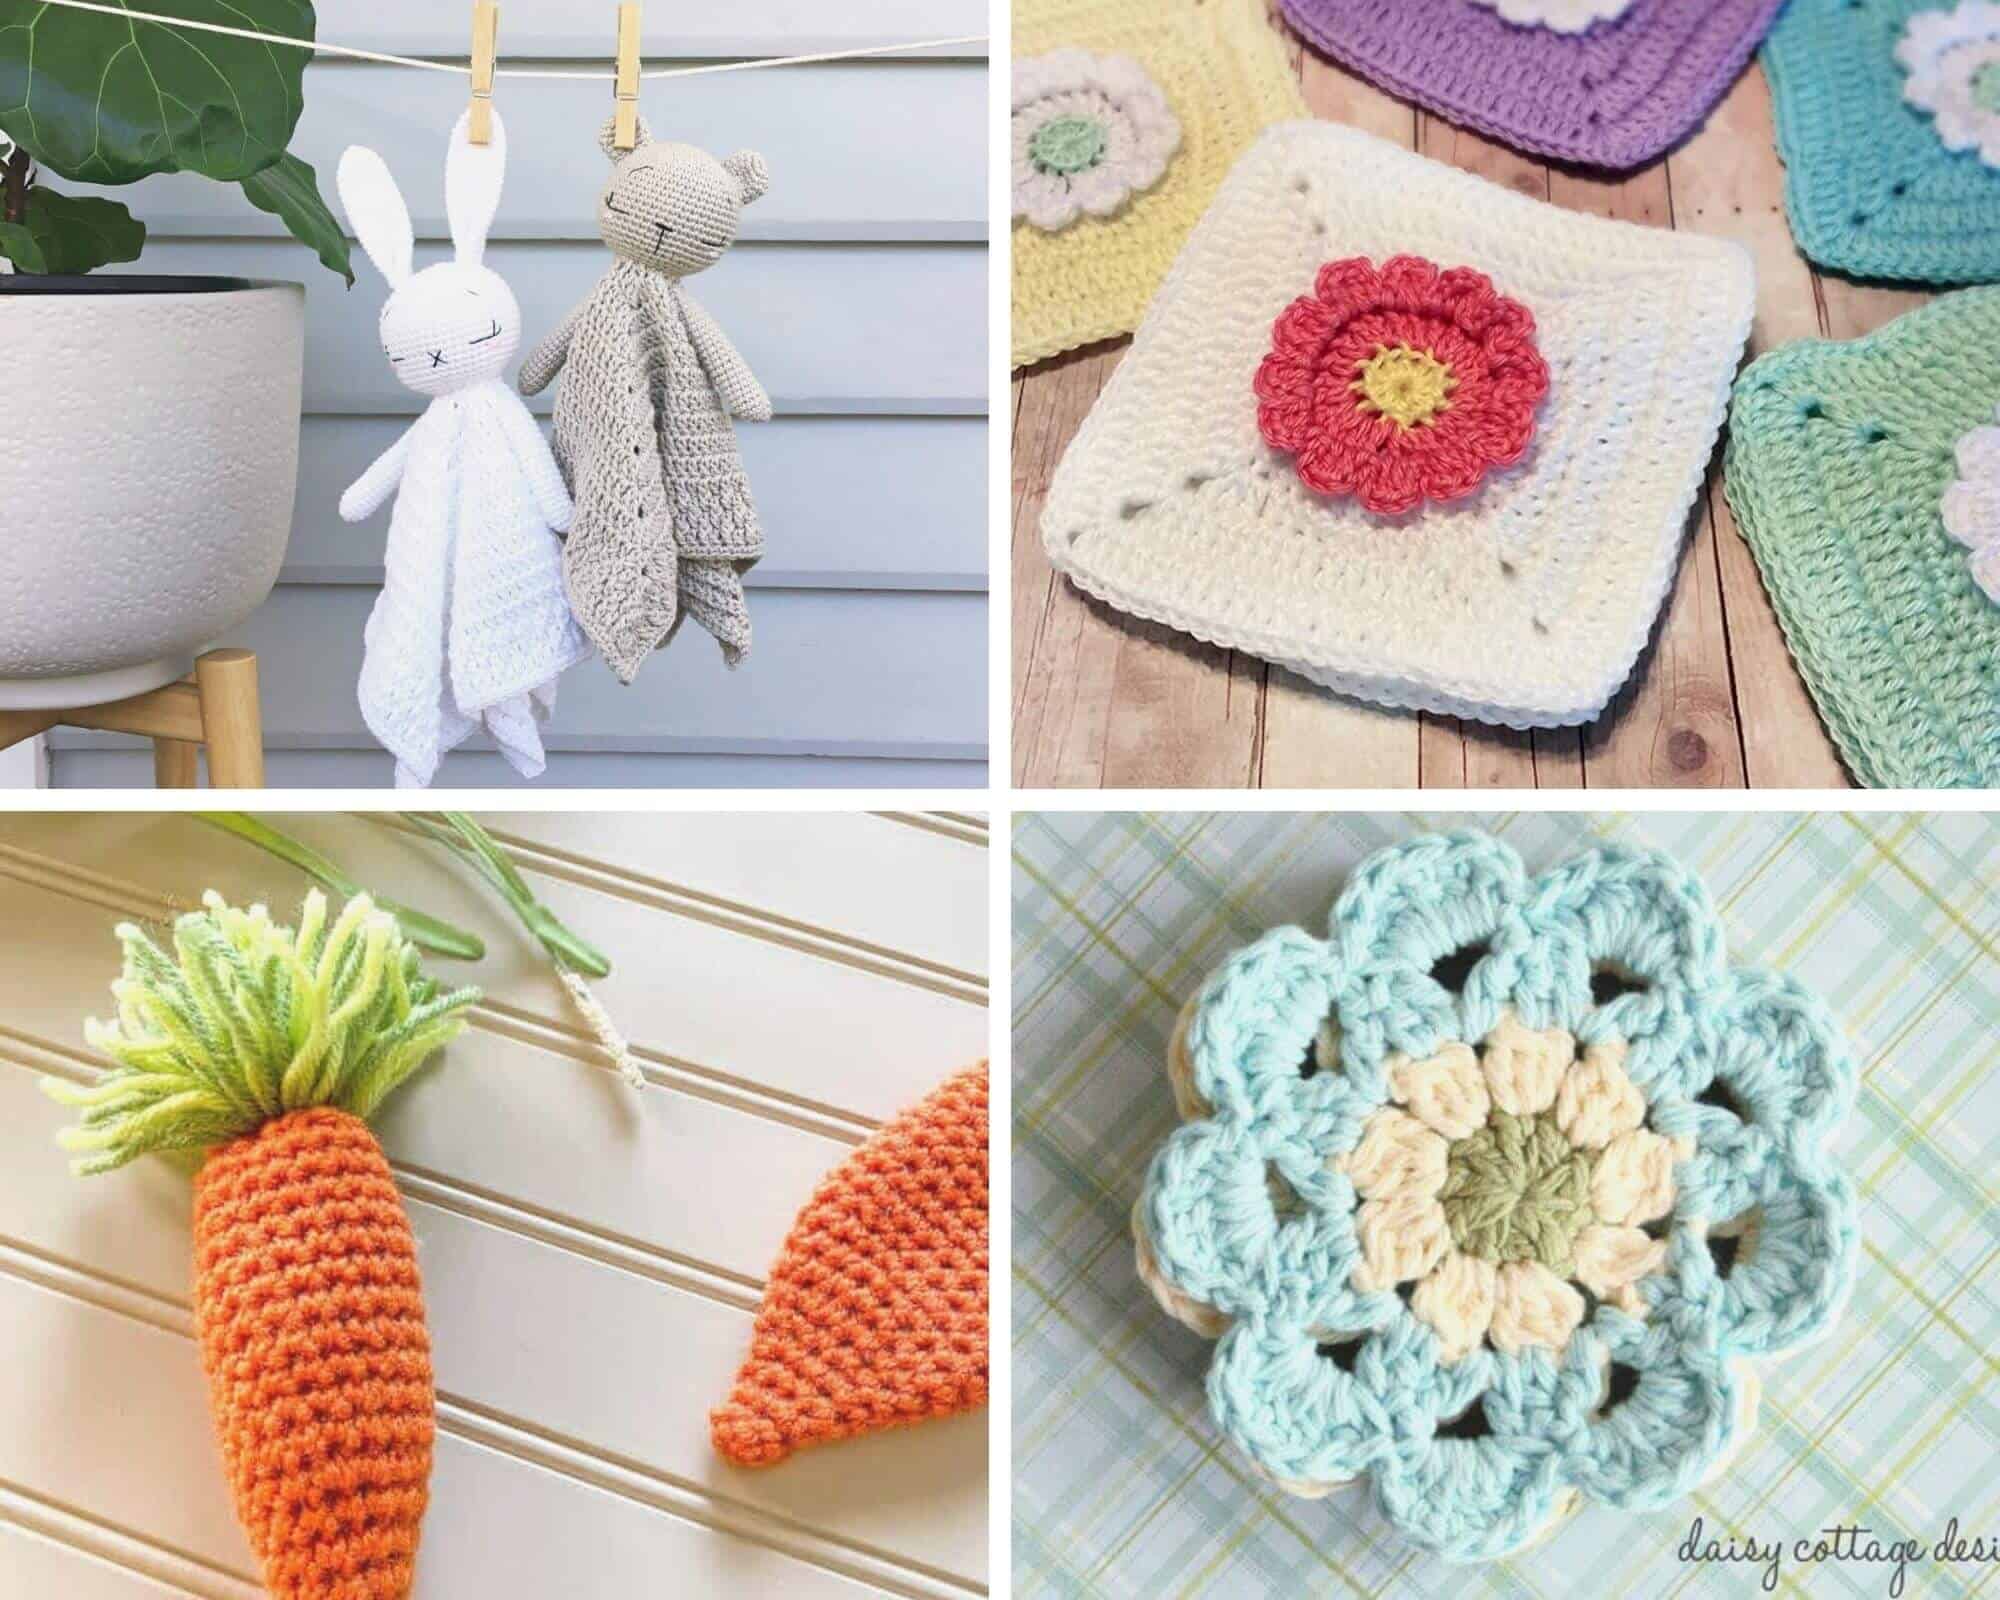 Free crochet patterns for spring!